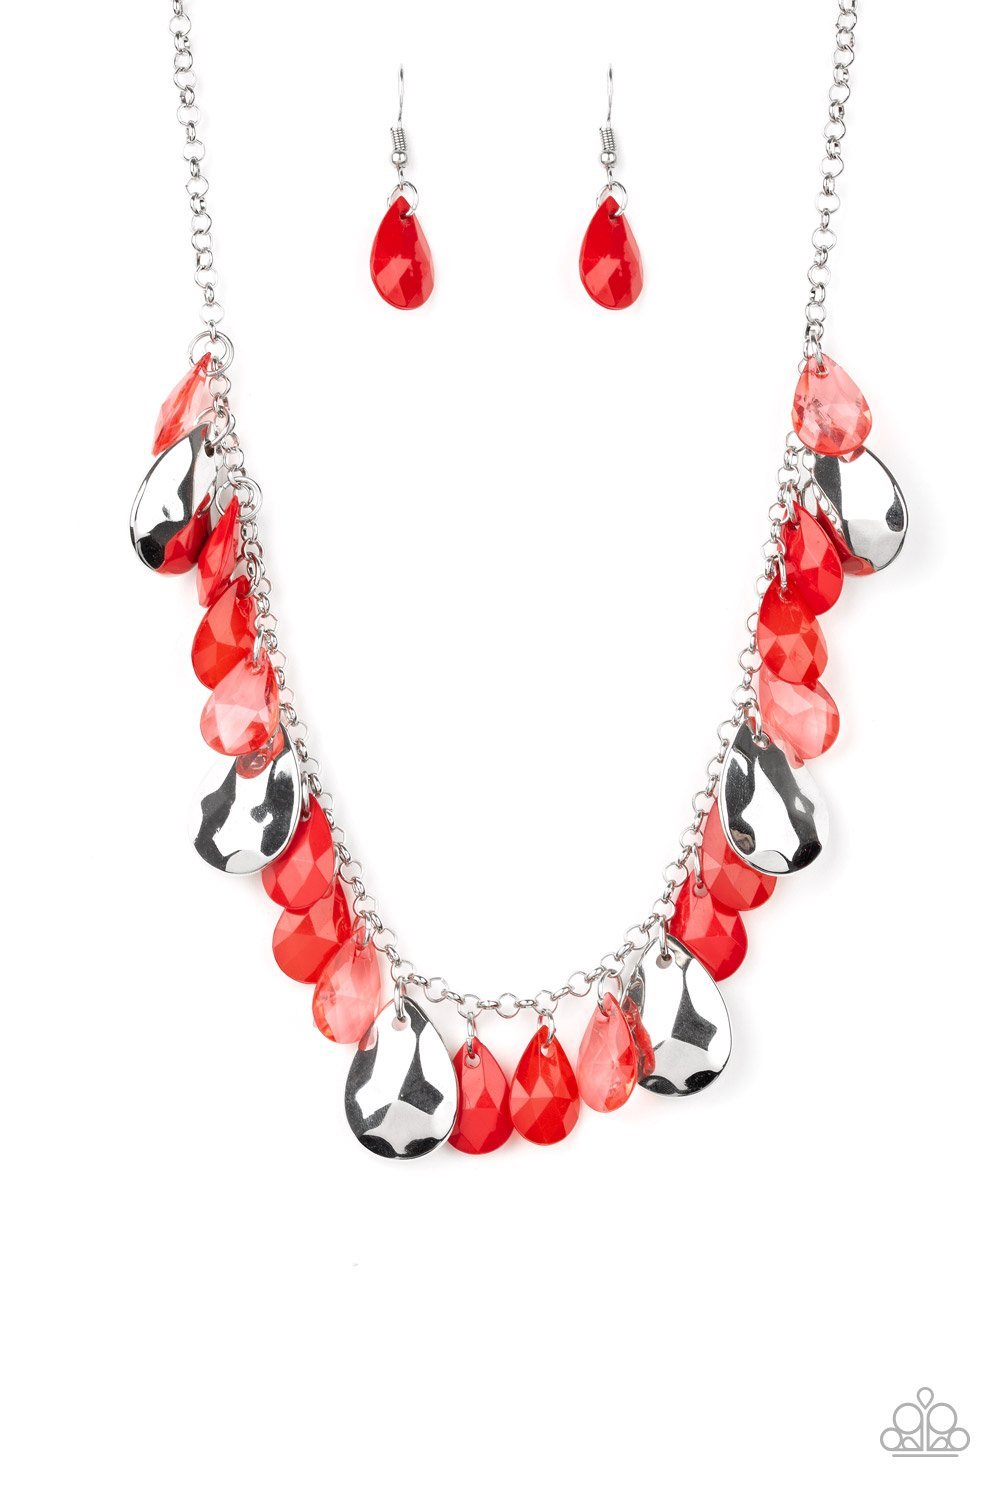 Hurricane Season - Paparazzi - Red and Silver Teardrop Necklace